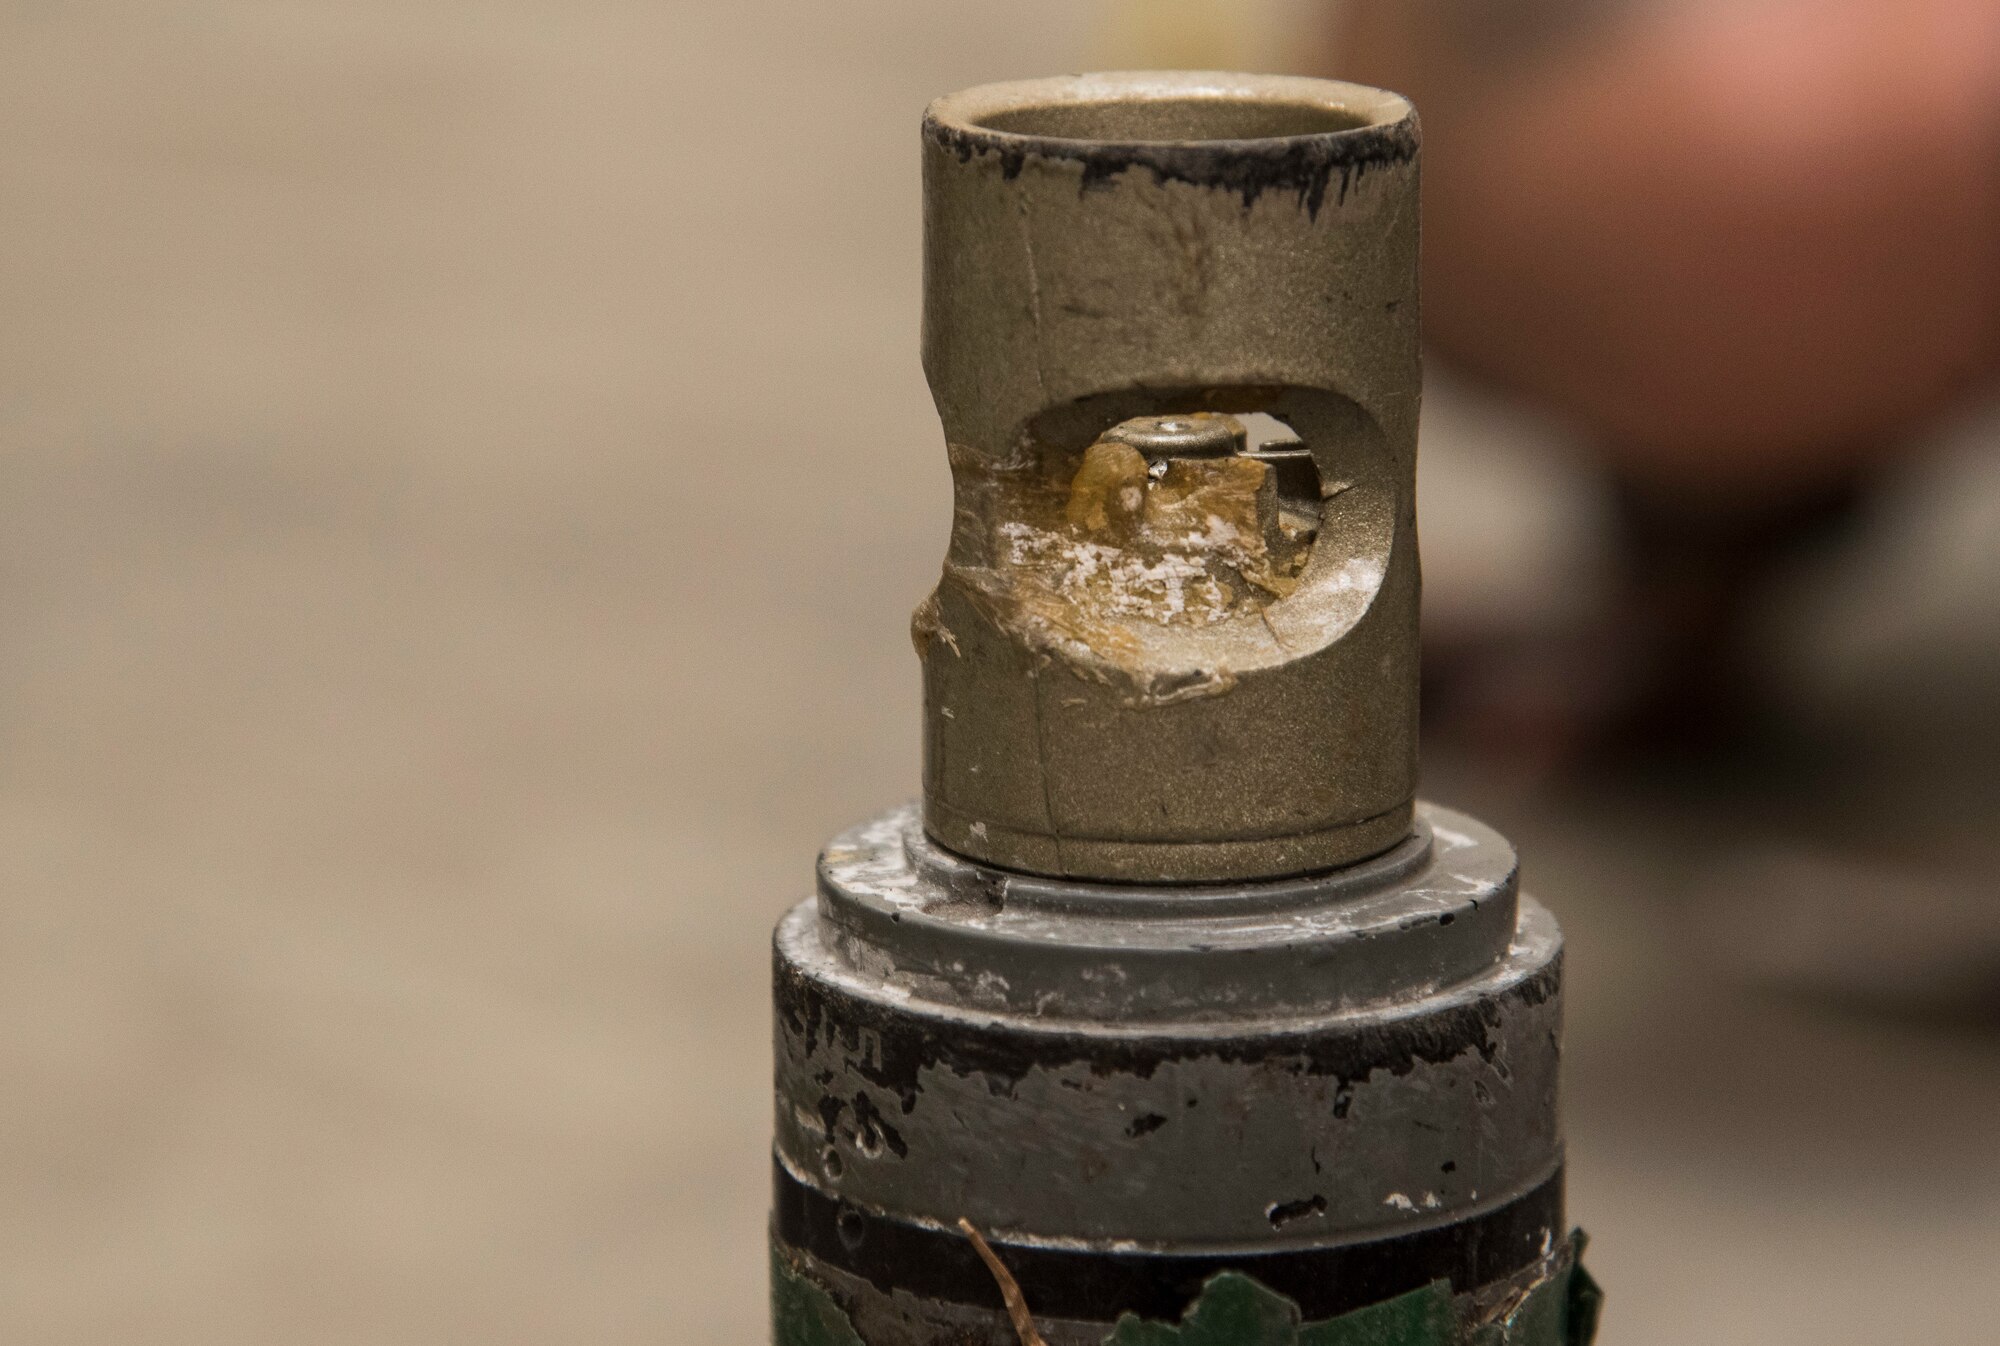 A fuse remains exposed on an inert sub-munition bomblet during a bilateral explosive ordnance
disposal training class at Misawa Air Base, Japan, March 29, 2018. A group of 11 Japan Air
Self-Defense Force 3rd Air Wing weapons maintenance technicians and Tohoku Sub Base,
Tohoku, Japan explosive ordnance disposal instructors, participated in the class. As a part of
their training, personnel had to identify 20 various types of unexploded ordnances while knowing
how different components make up the ordnance. (U.S. Air Force photo by Senior Airman Sadie
Colbert)